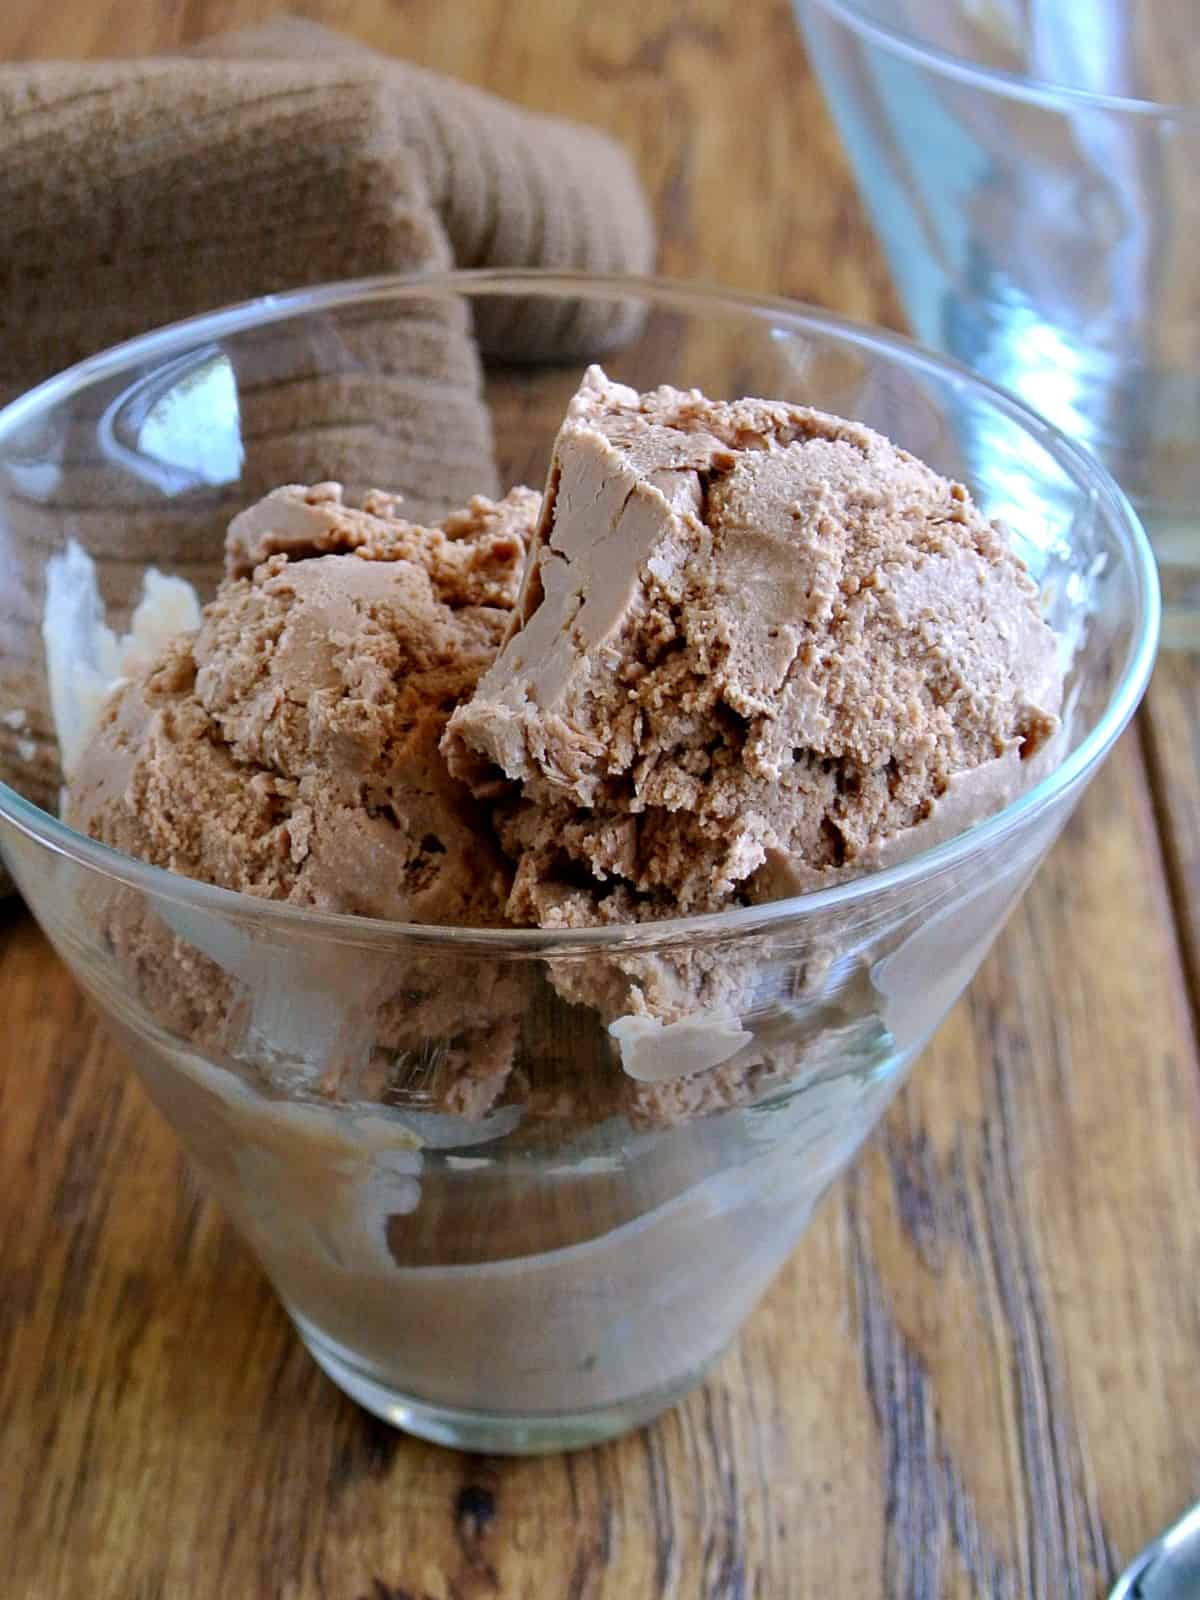 A tilted glass full of homemade frozen treat scoops of deep chocolate.